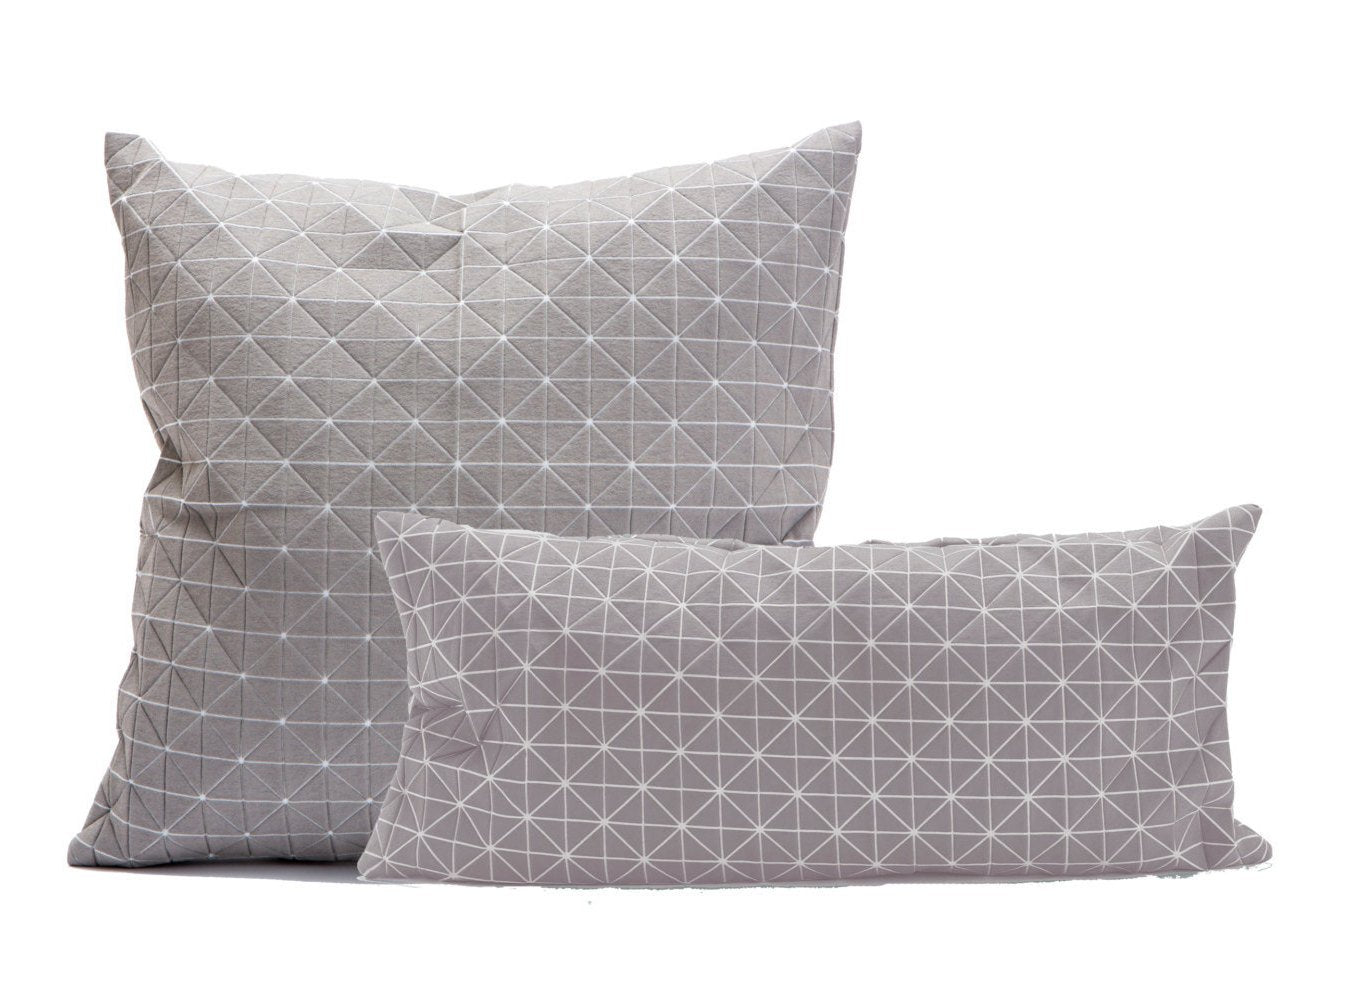 Two origami geometric pillow cases 50x50 cm/19.5X19.5 inch & 60x30 cm/23.5x11.8 inch, Pair of  folding cushion covers, Home accessory